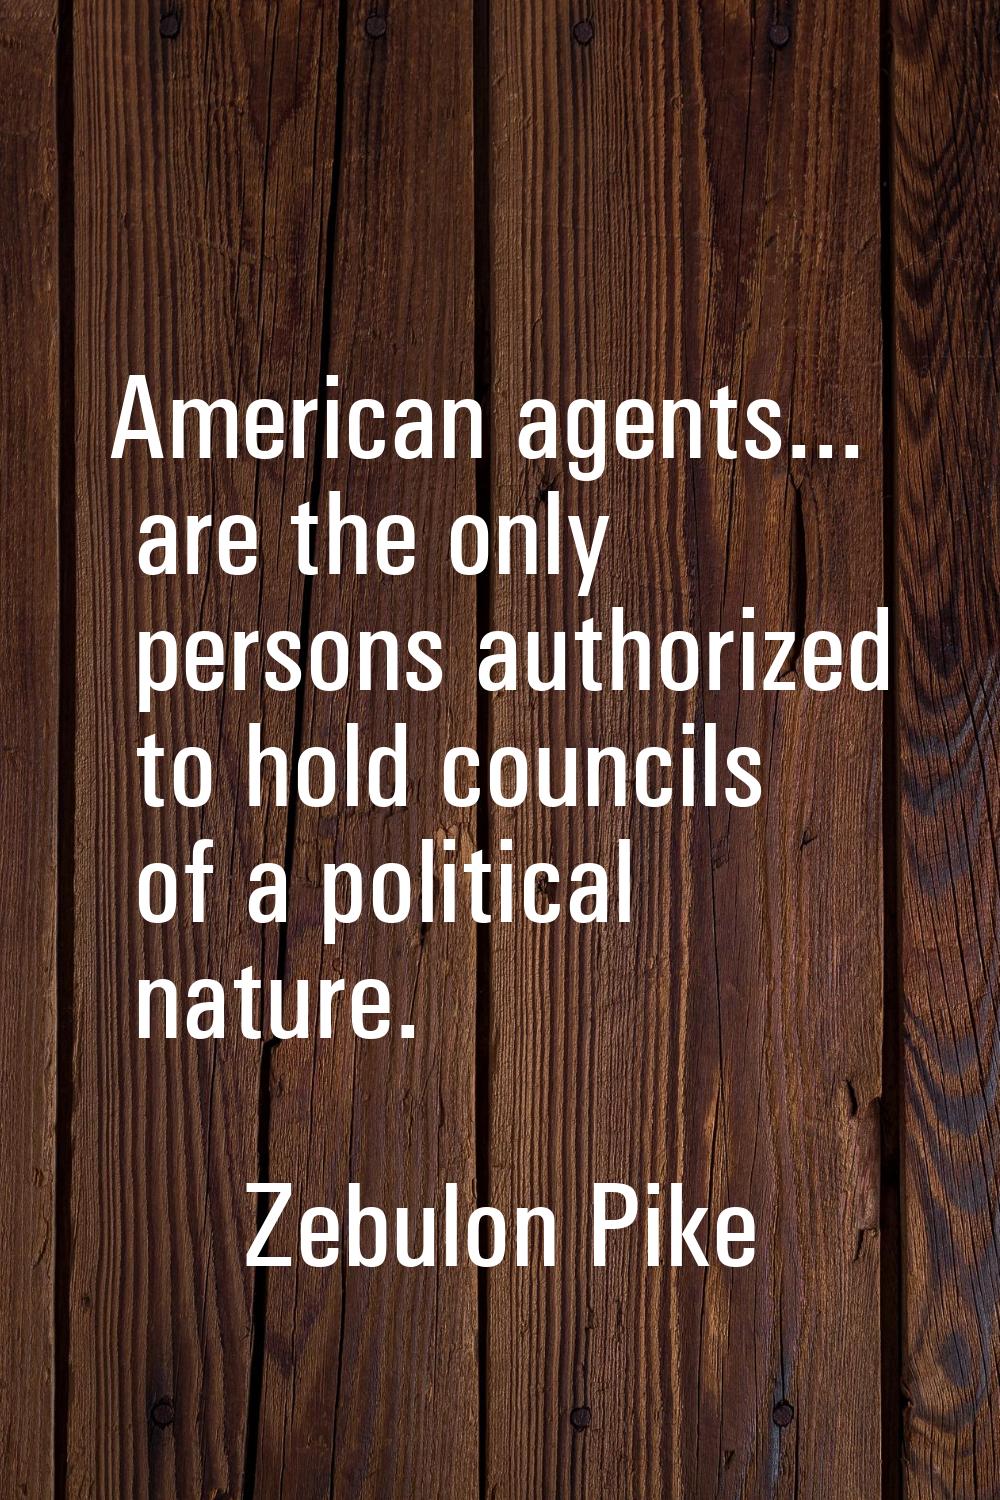 American agents... are the only persons authorized to hold councils of a political nature.